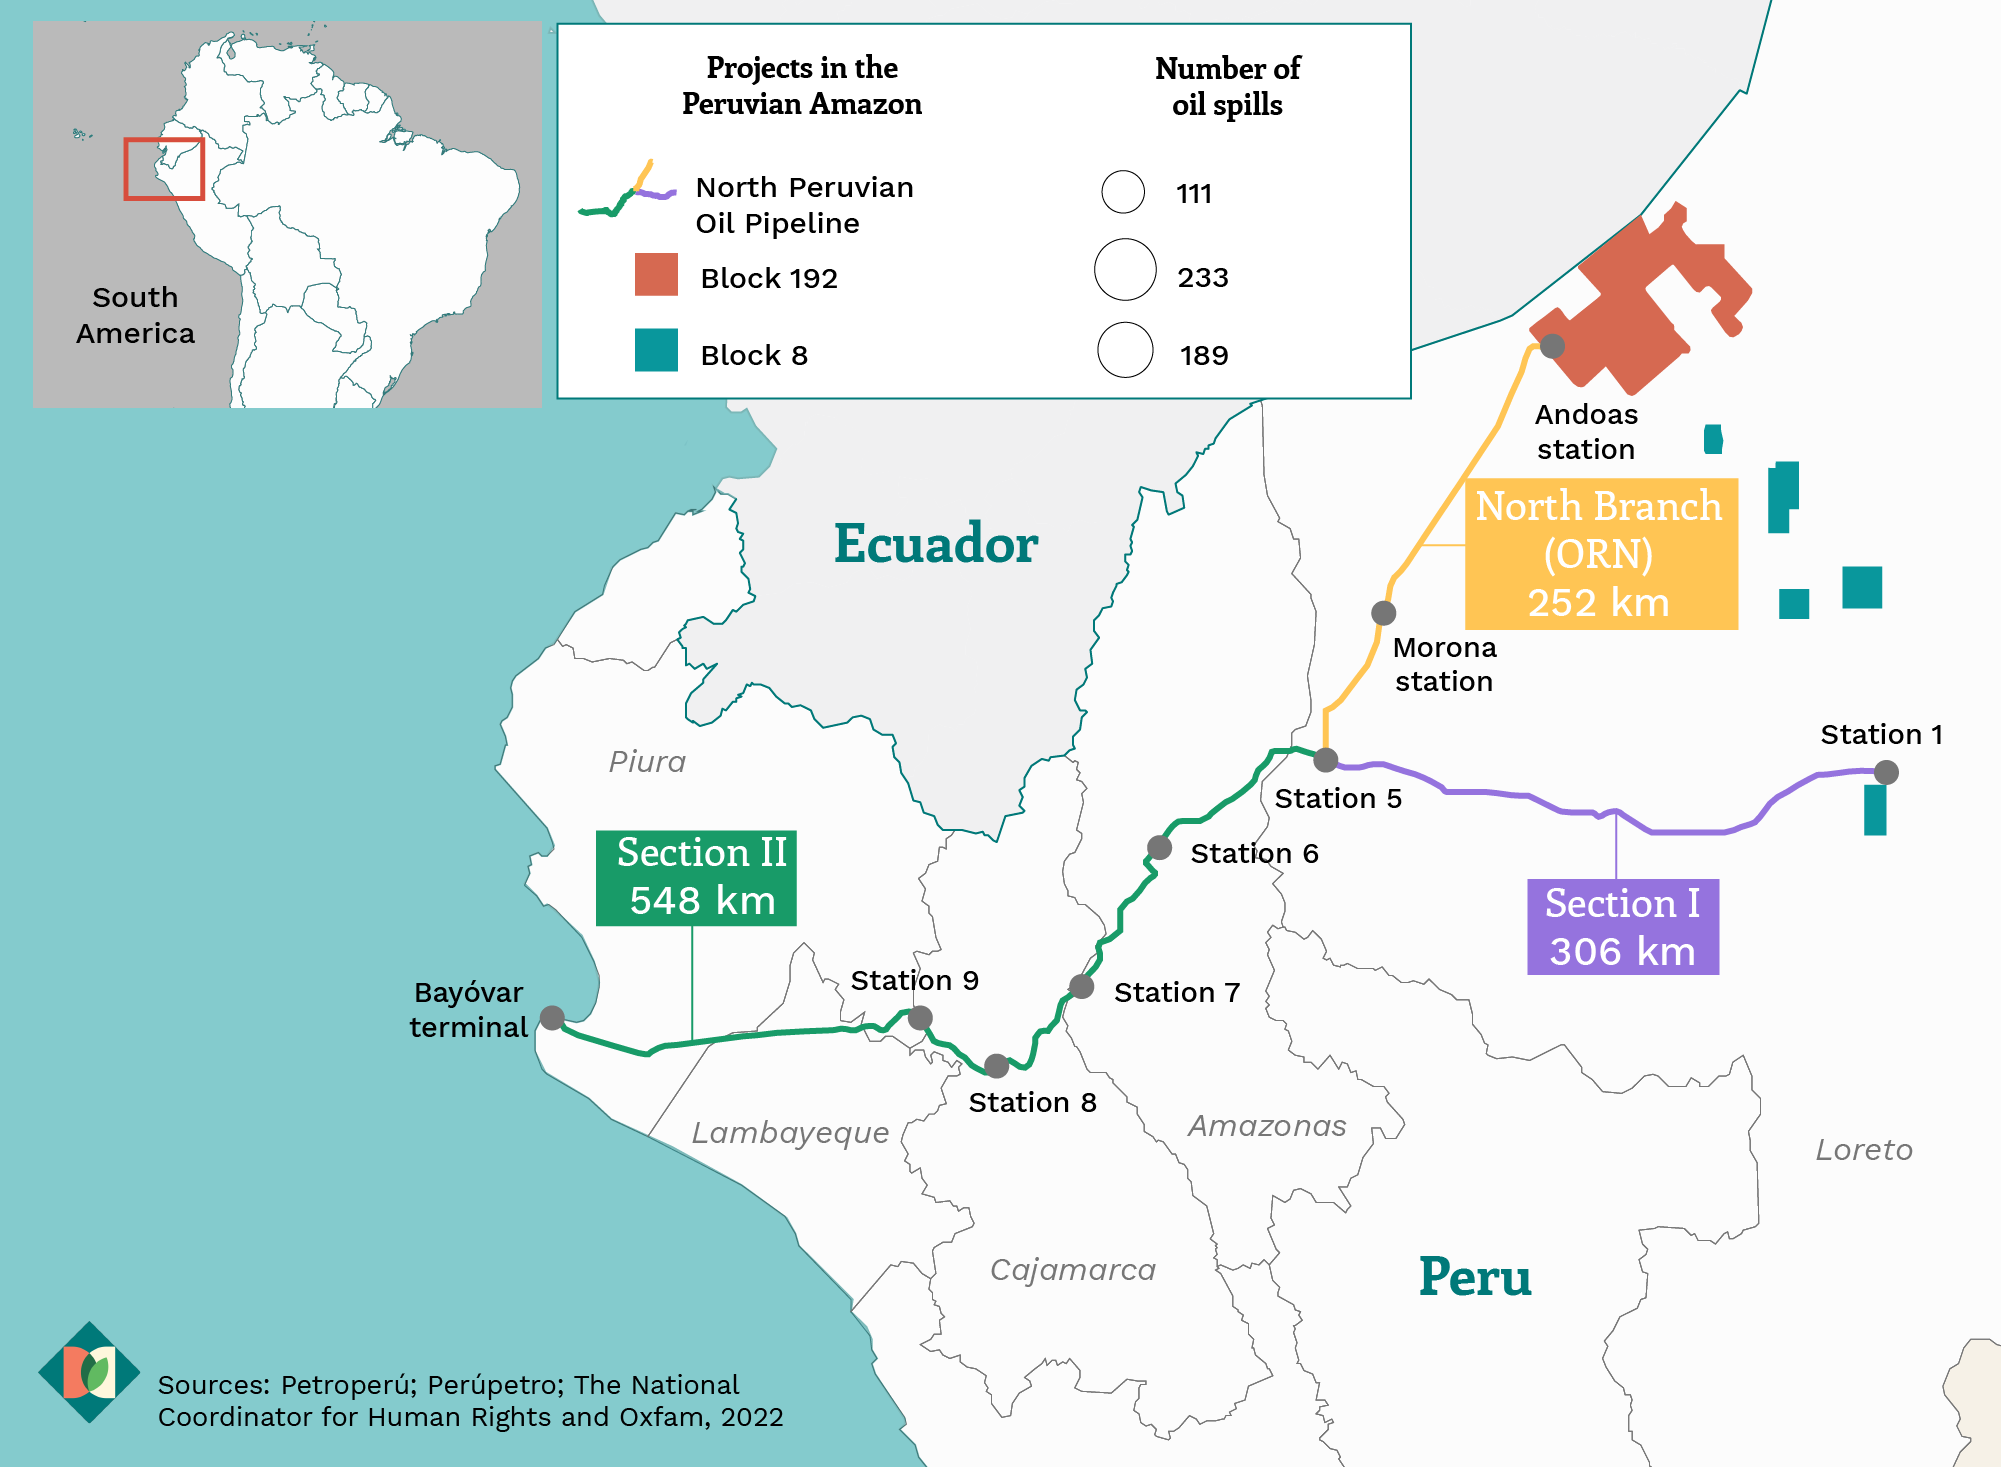 map showing the extent of the North Peruvian oil pipeline and oil spills